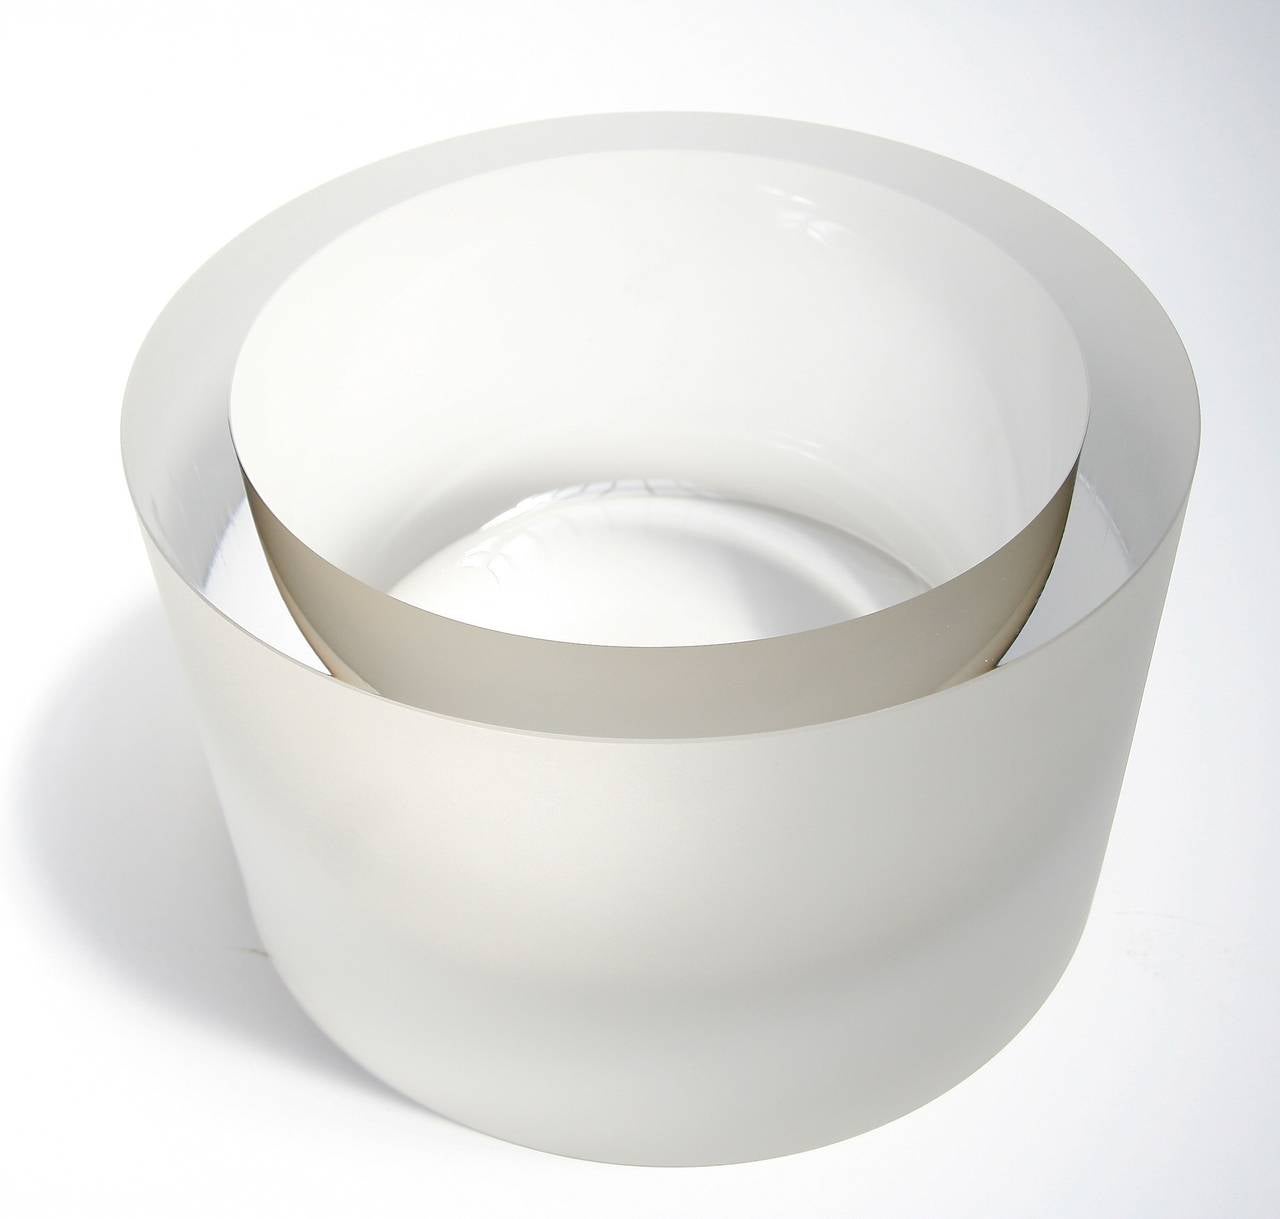 Anna Torfs large Valenta glass bowl in smoke with sanded finish. Available in other colors.